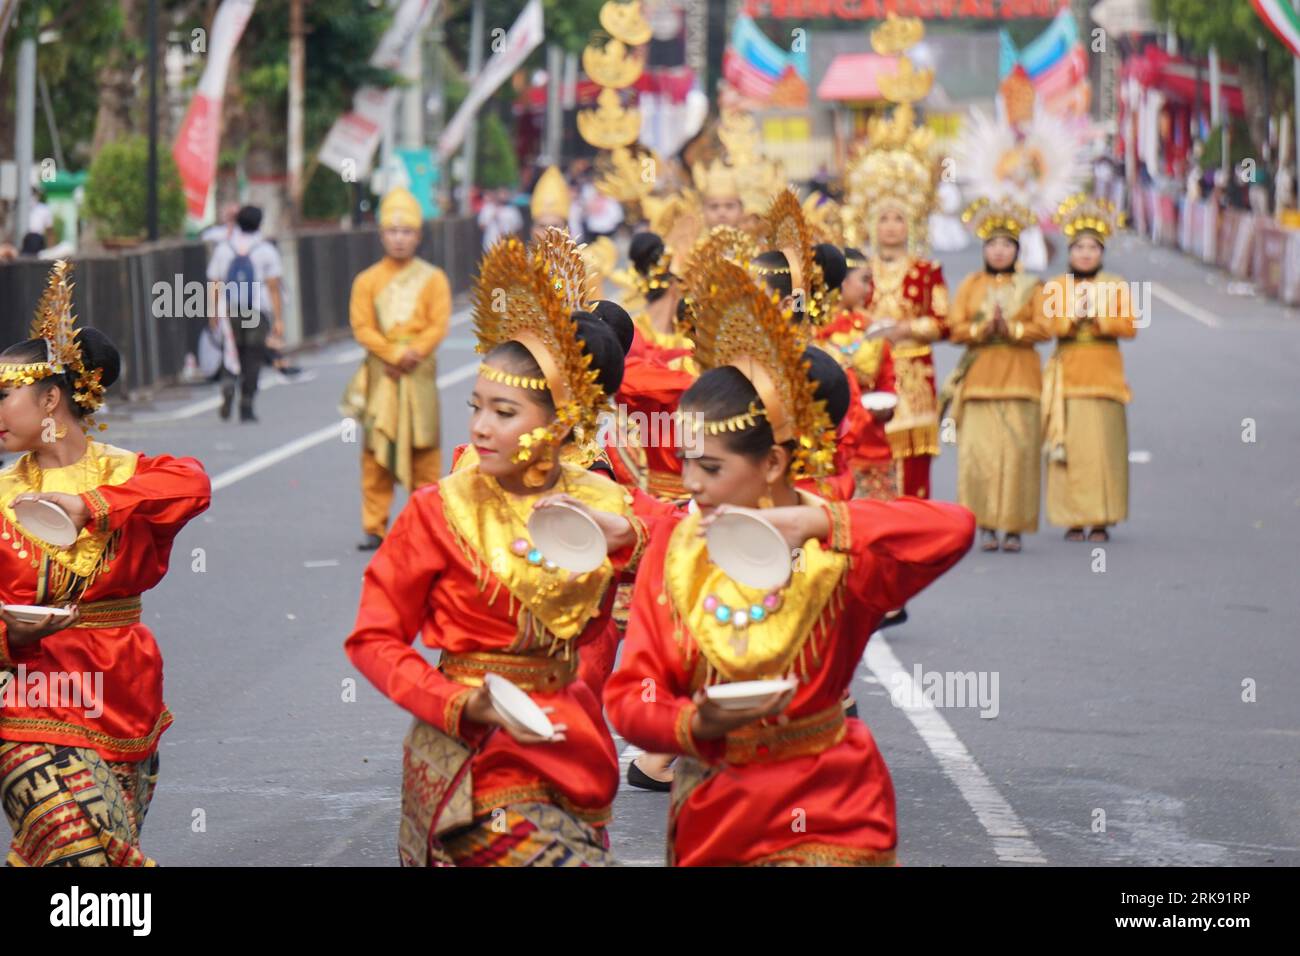 Piring dance from west sumatera at BEN Carnival. This dance is a ritual of gratitude for the people to the gods after getting an abundant harvest Stock Photo